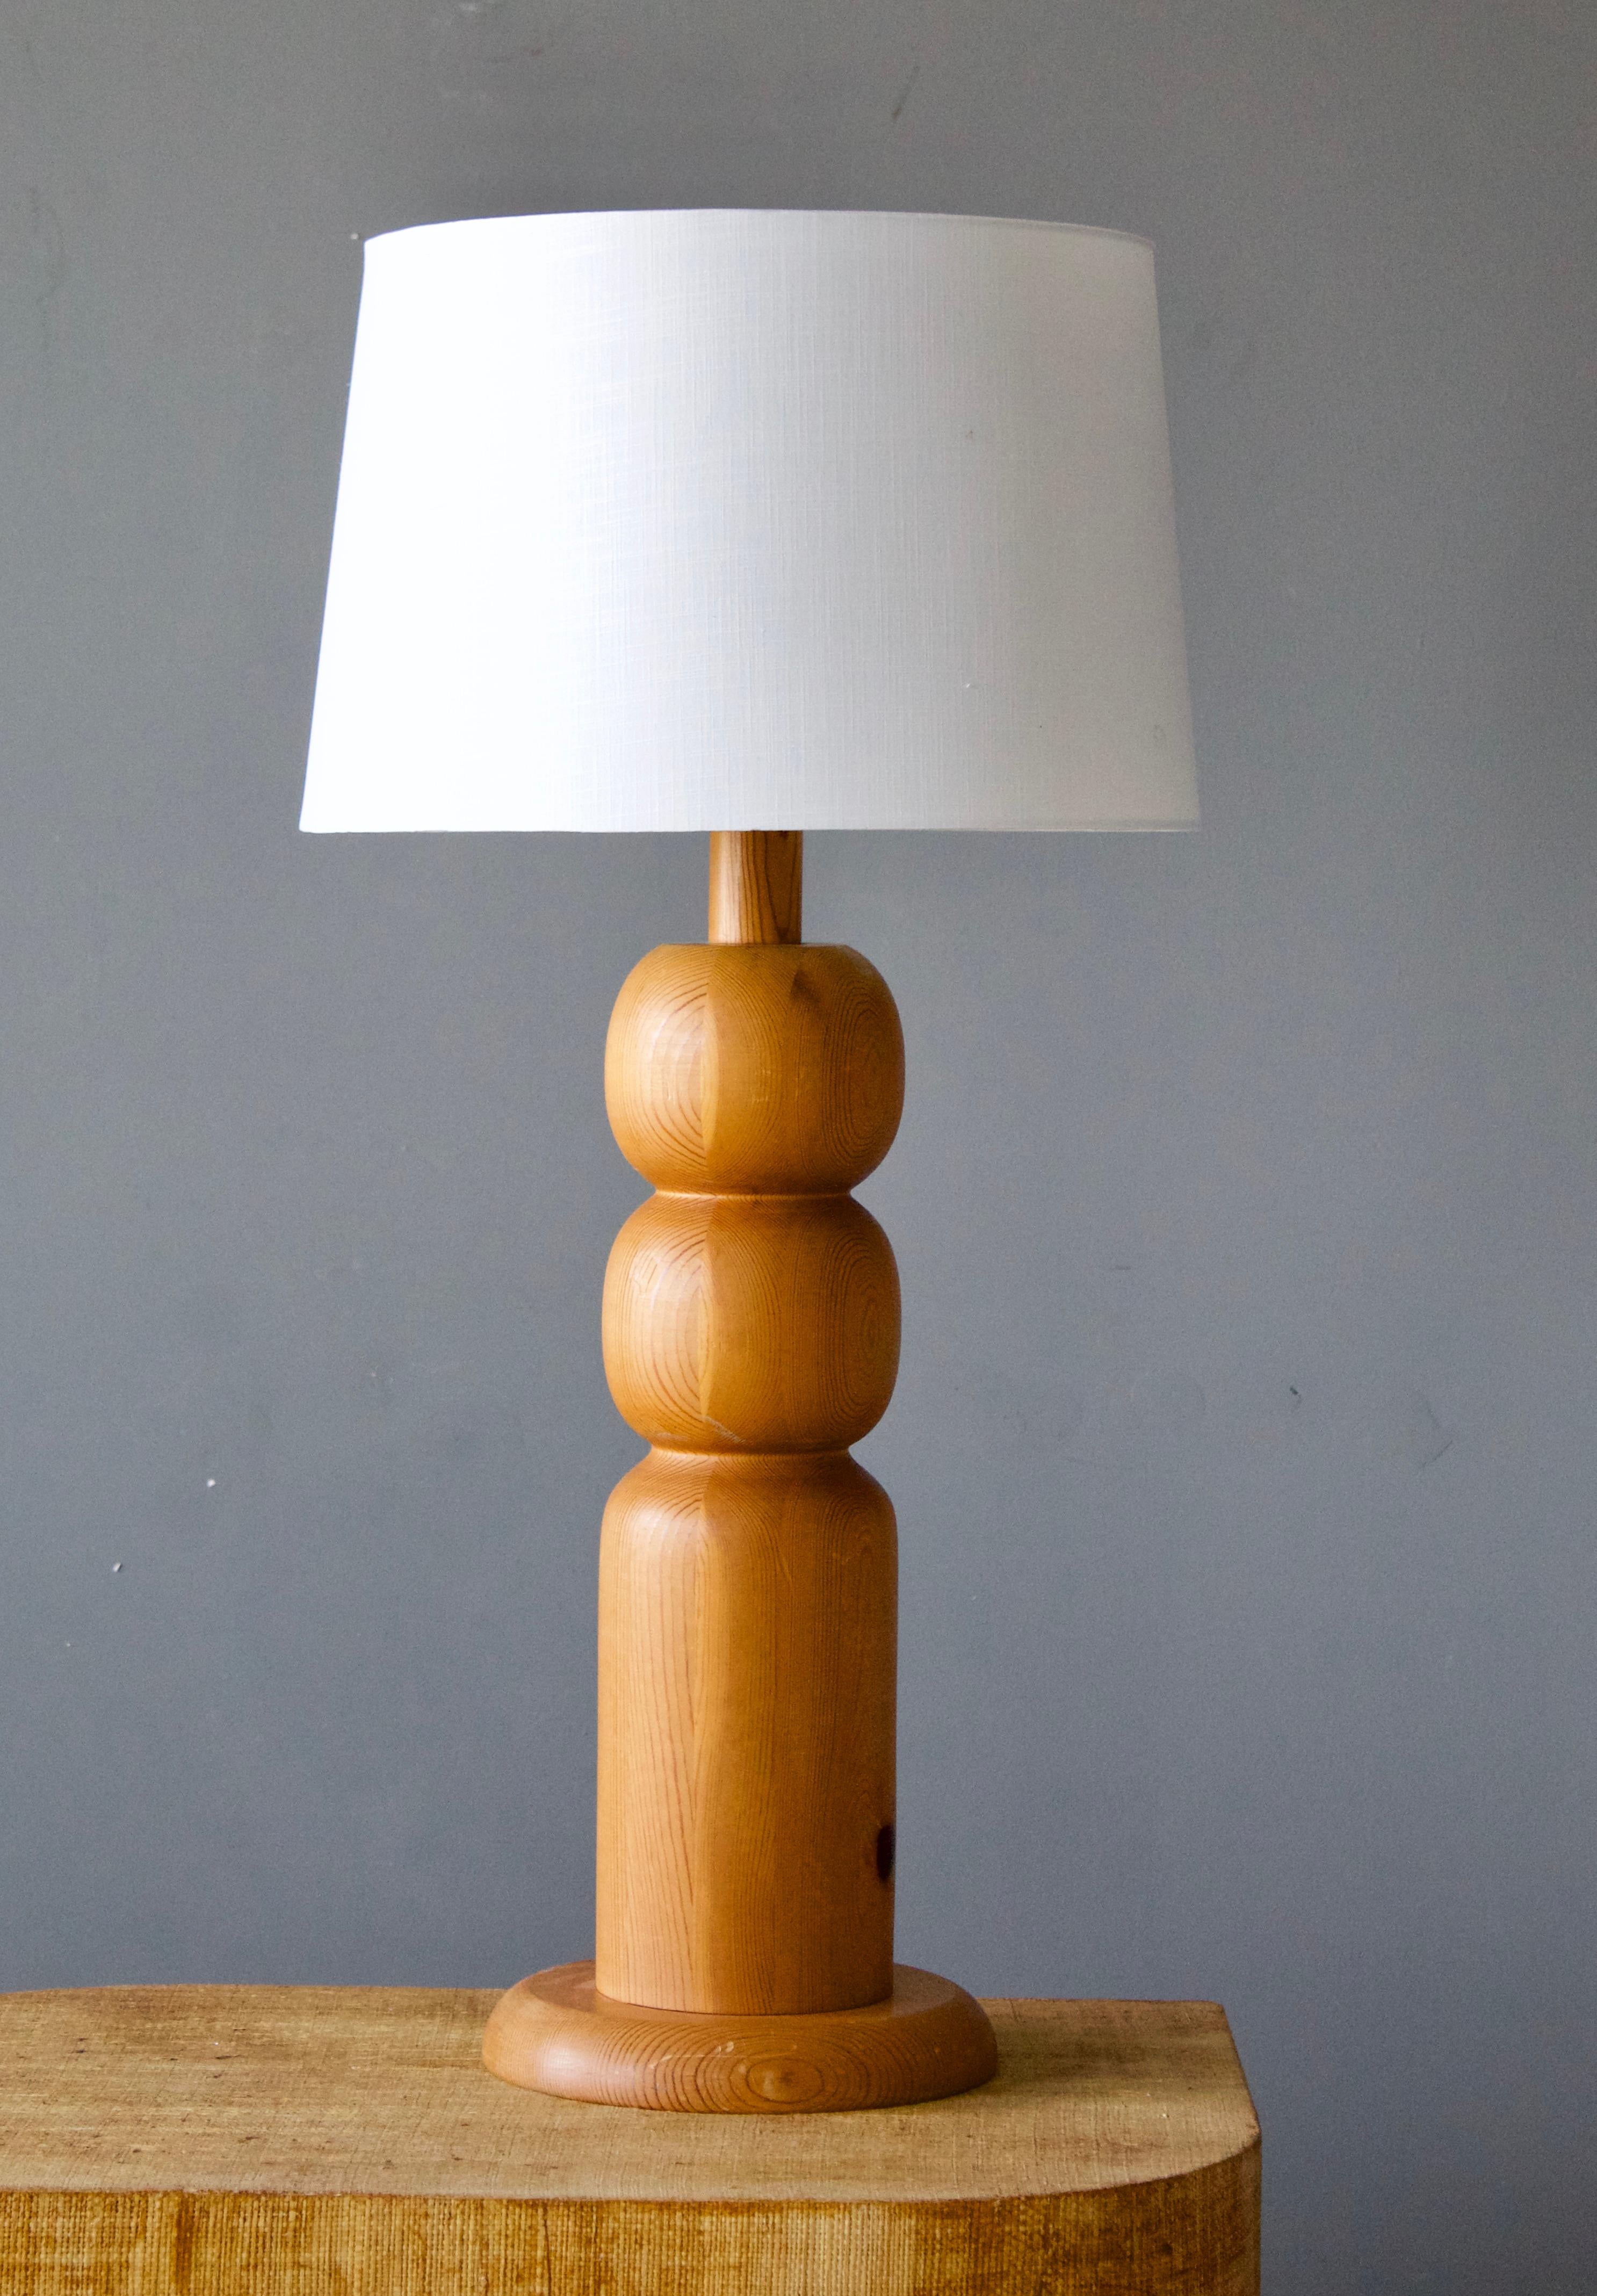 A large table lamp. In turned solid pine. By unknown studio craftsman.

Sold without lampshade. Stated dimensions excluding bulbs and lampshade.

Other designers of the period include Alexandre Knoll, George Nakashima, Isamu Noguchi, J.B. Blunk